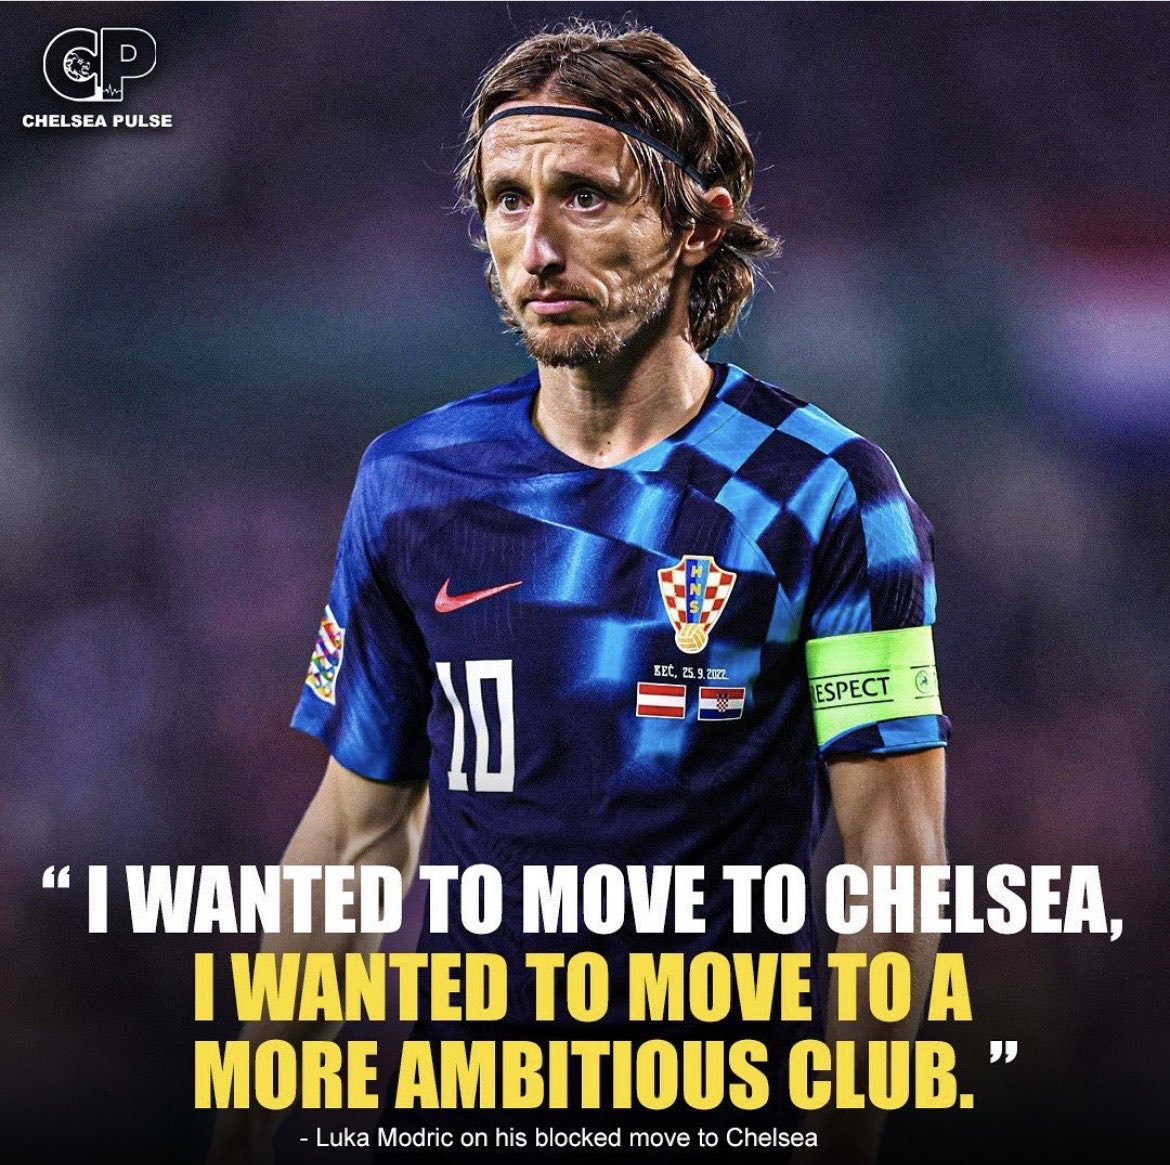 RT @FrankKhalidUK: Did you know Luka Modric wanted to move to Chelsea, when he was at Spurs. https://t.co/cGc6KF8H14